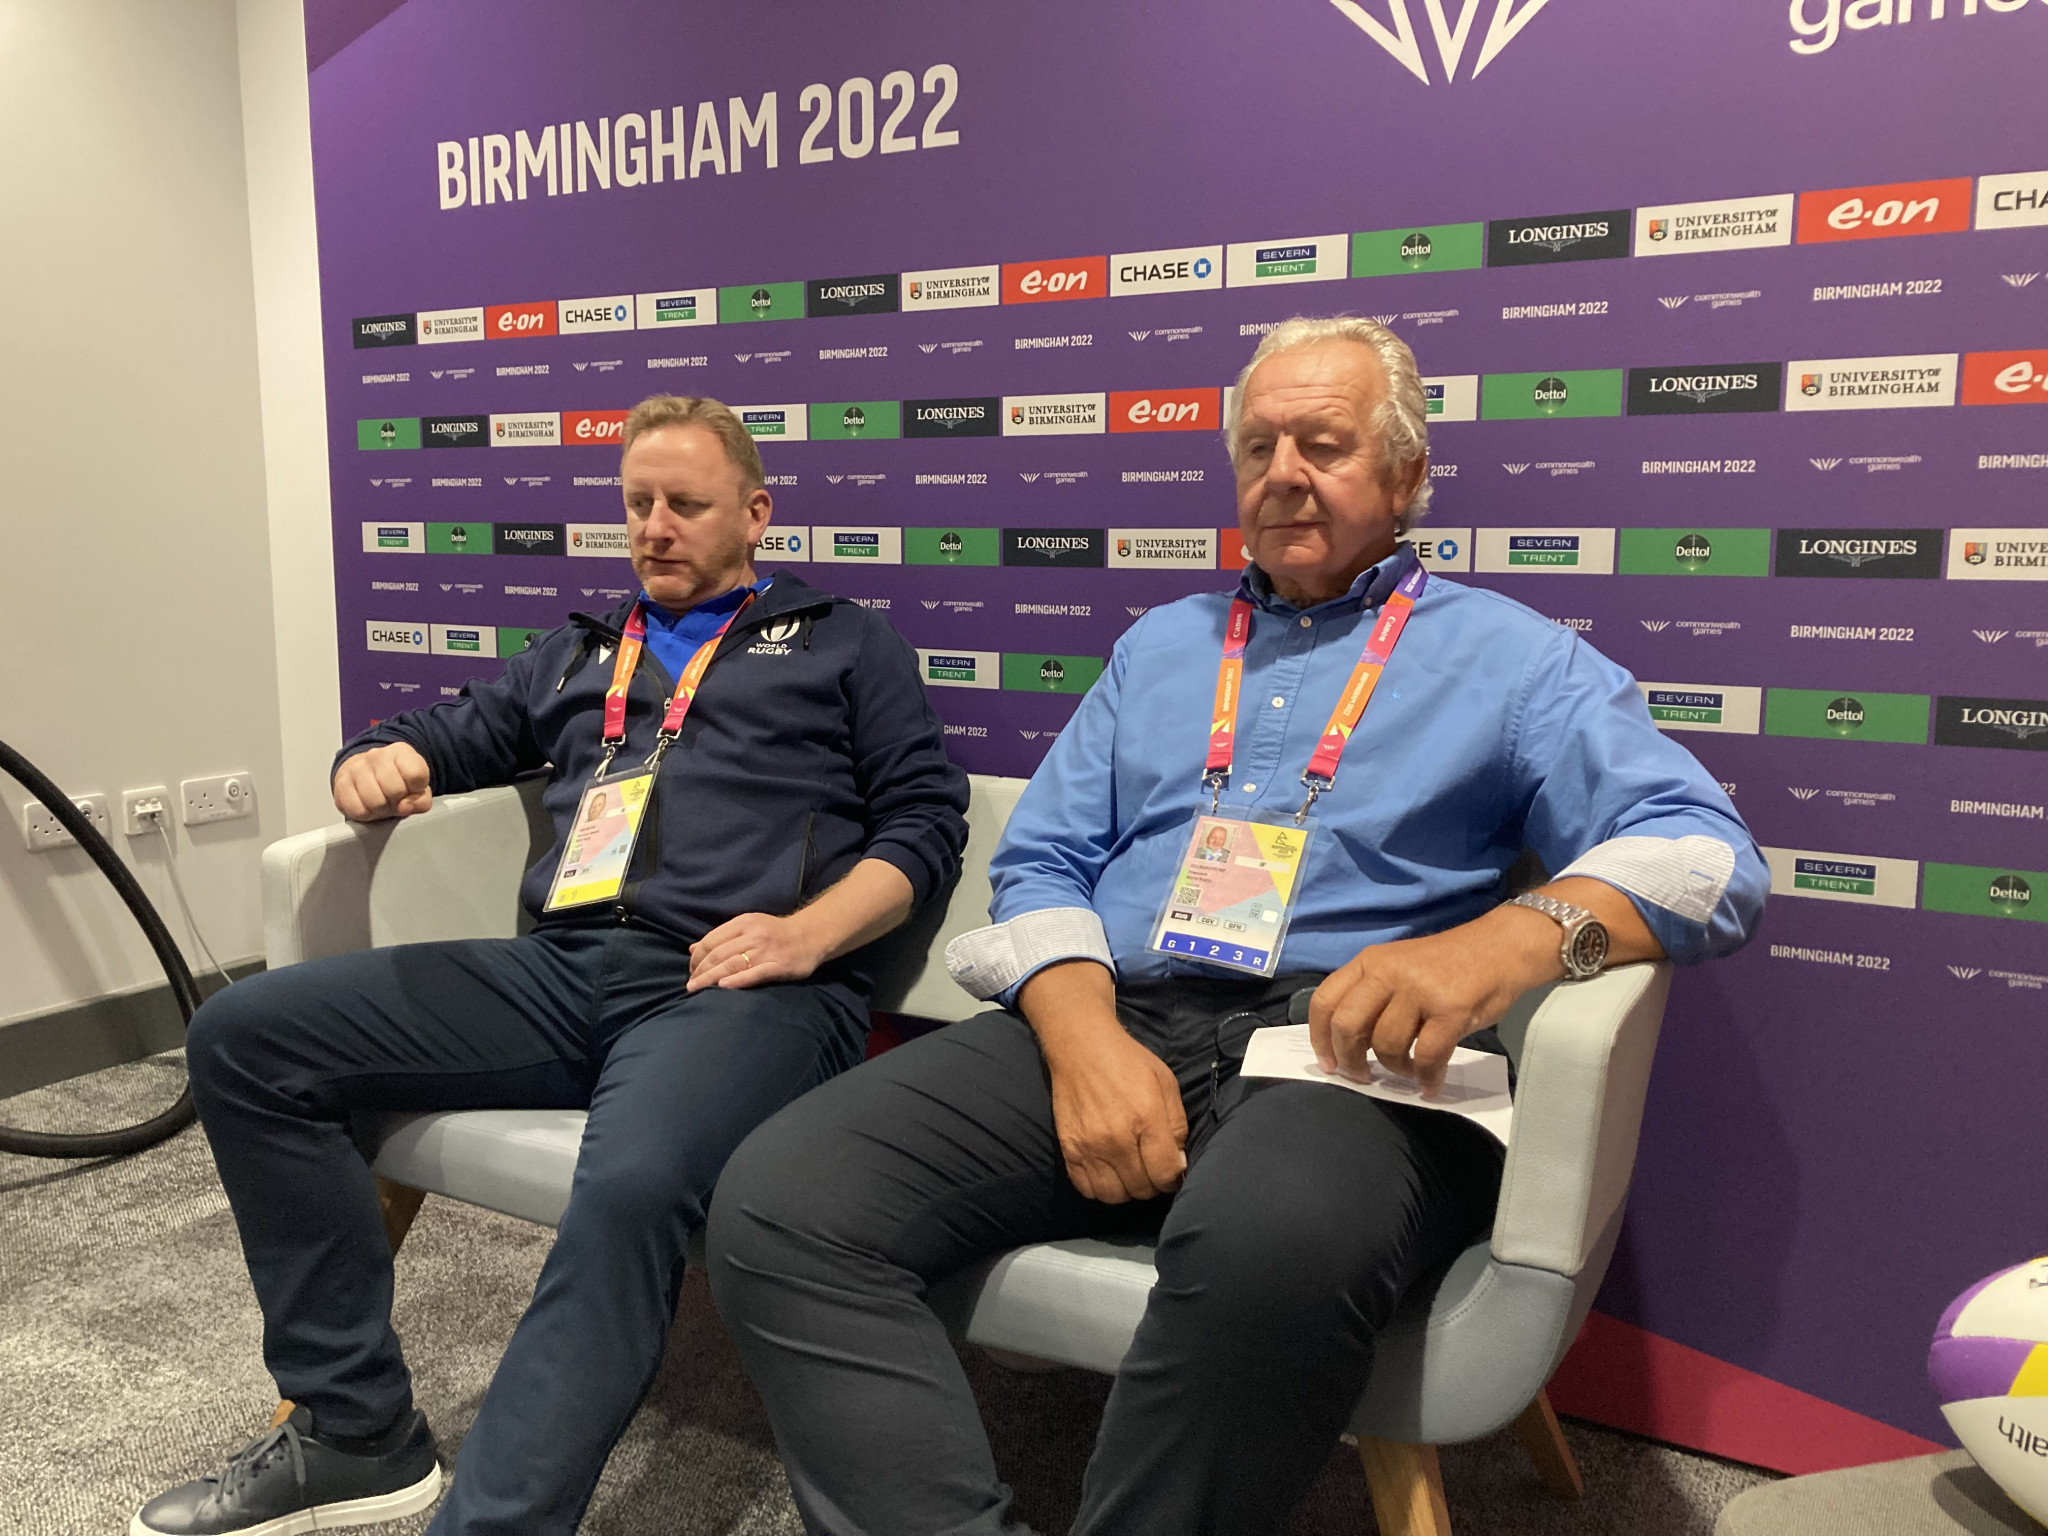 World Rugby chief executive Alan Gilpin, left, and chairman Sir Bill Beaumont, right, spoke to media at the Birmingham 2022 Commonwealth Games ©ITG